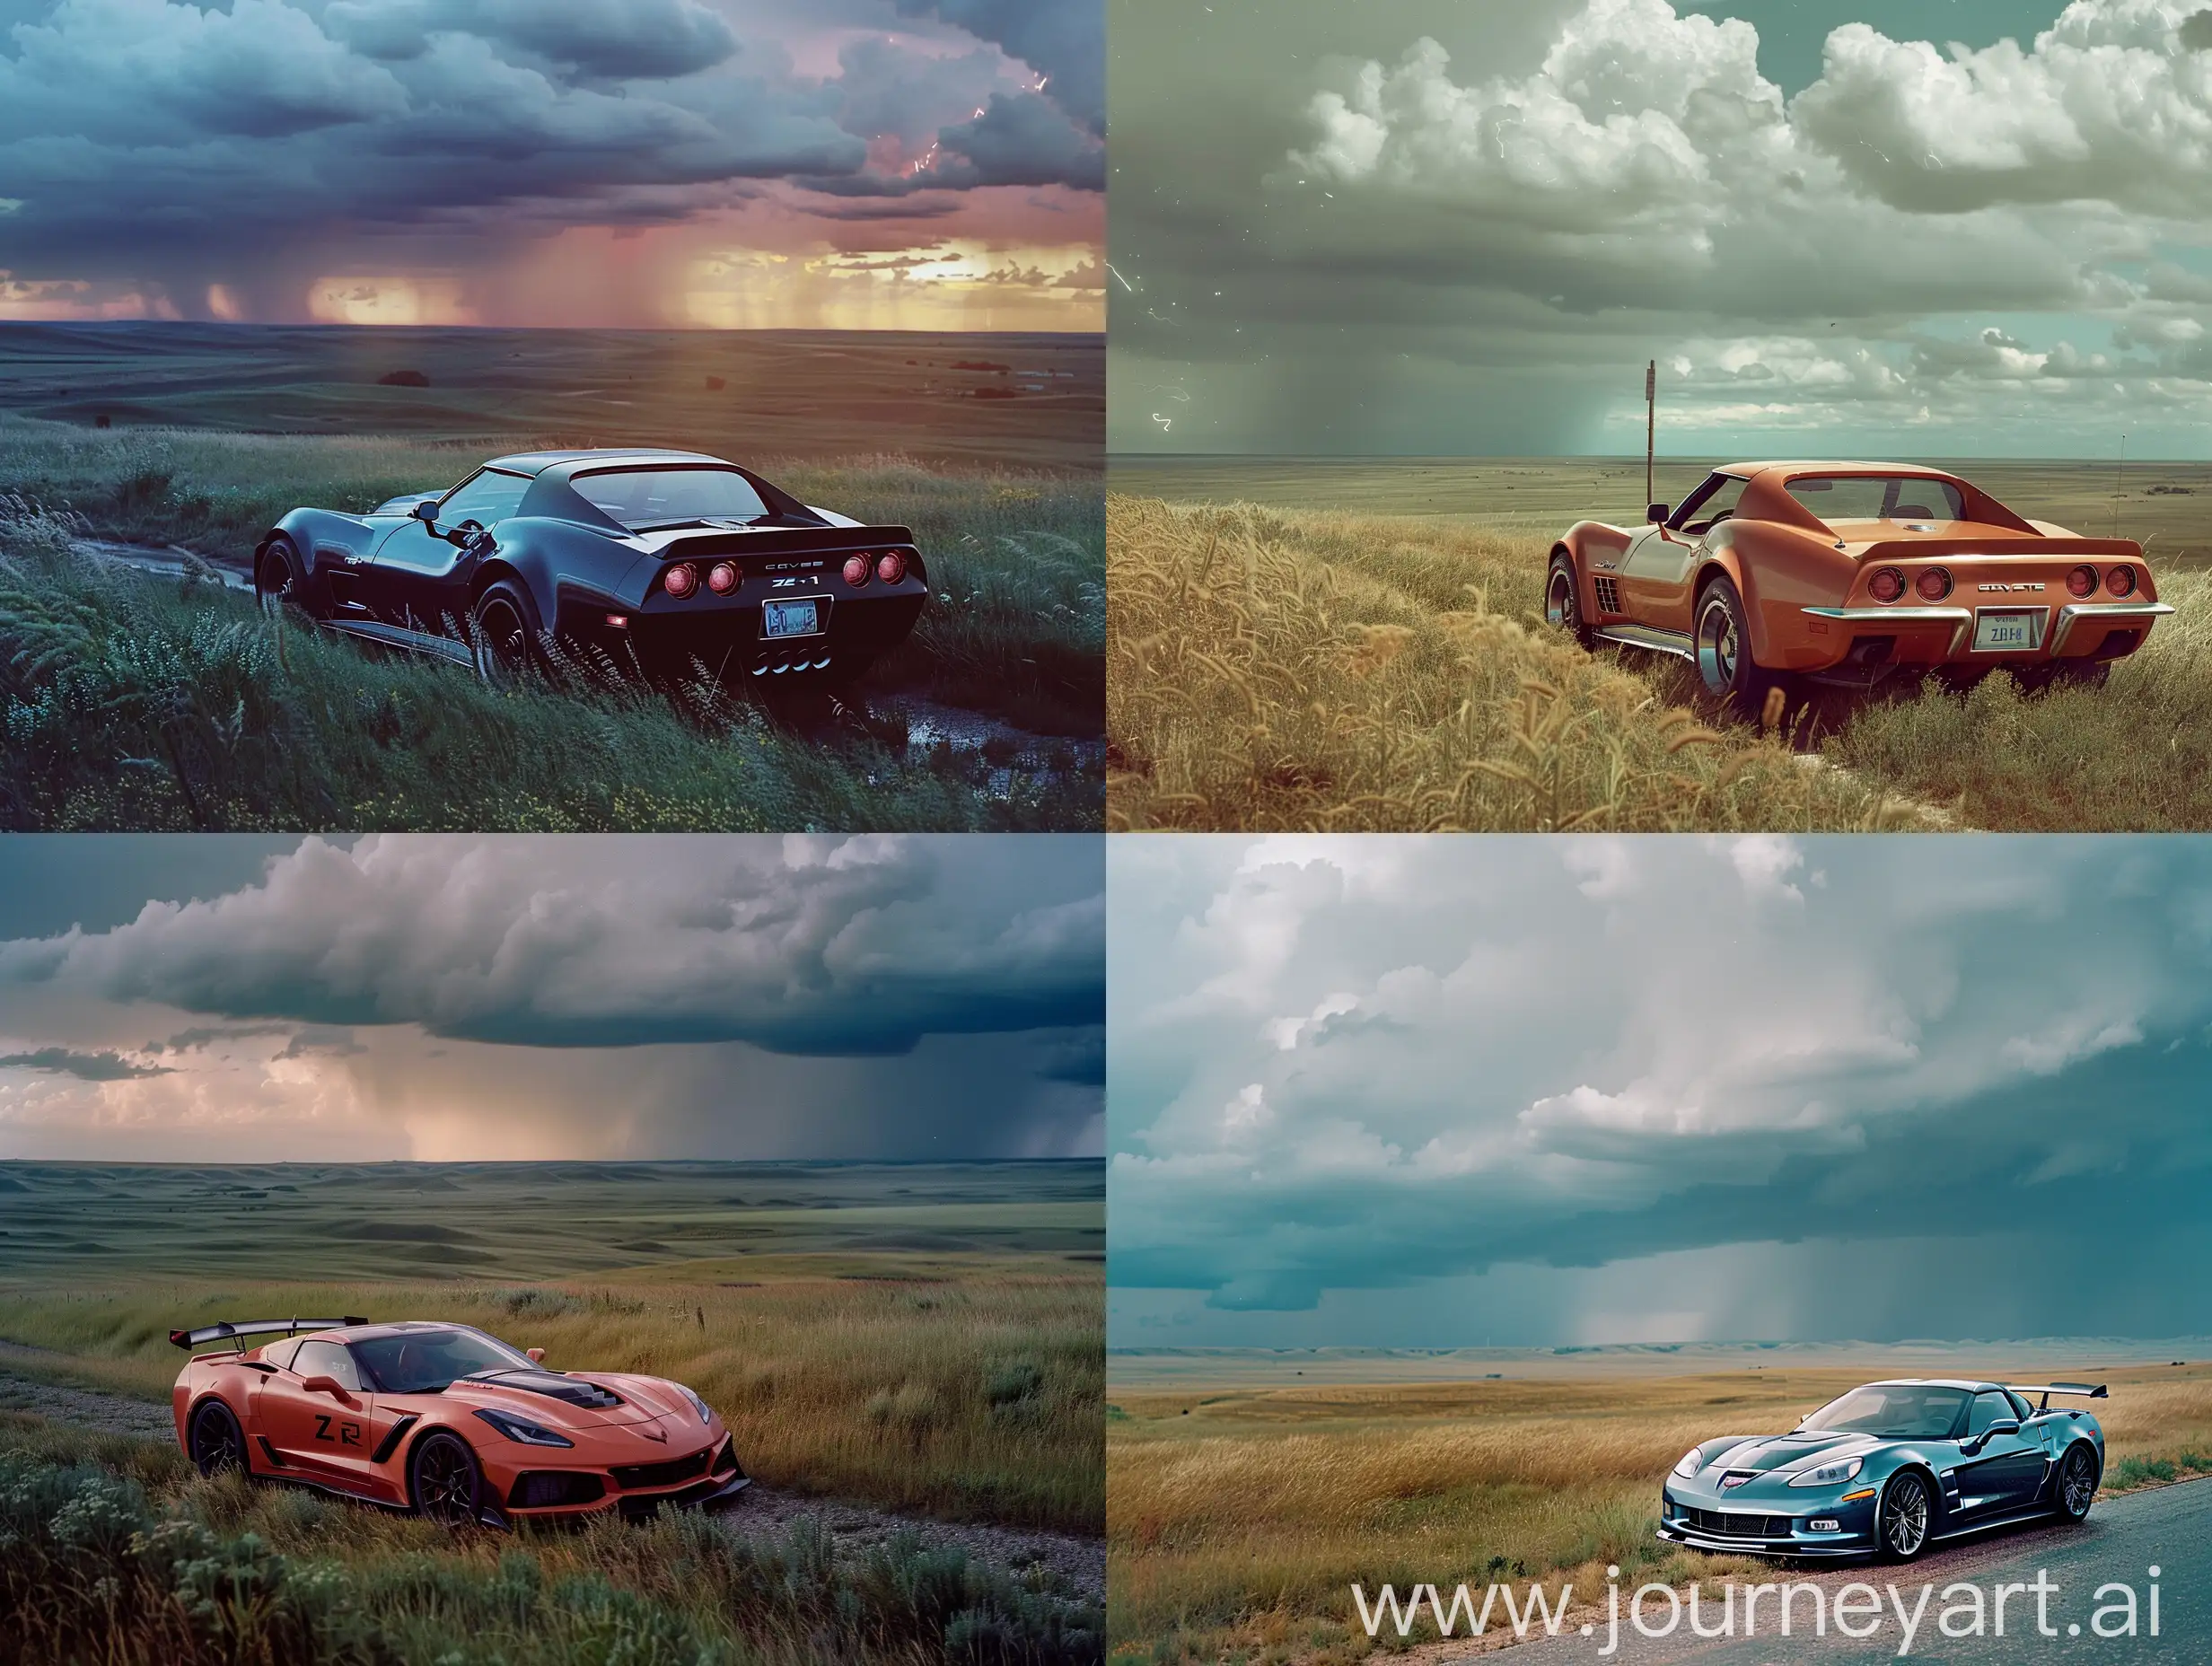 Photo of a chevrolet corvette zr1 at a thunderstorm rolling in over a prairie landscape. Taken by rosângela rennó (conceptual photographer) using a sony alpha a6000 camera with a lomography xprochrome film and a olympus m.zuiko digital ed 25mm lens.